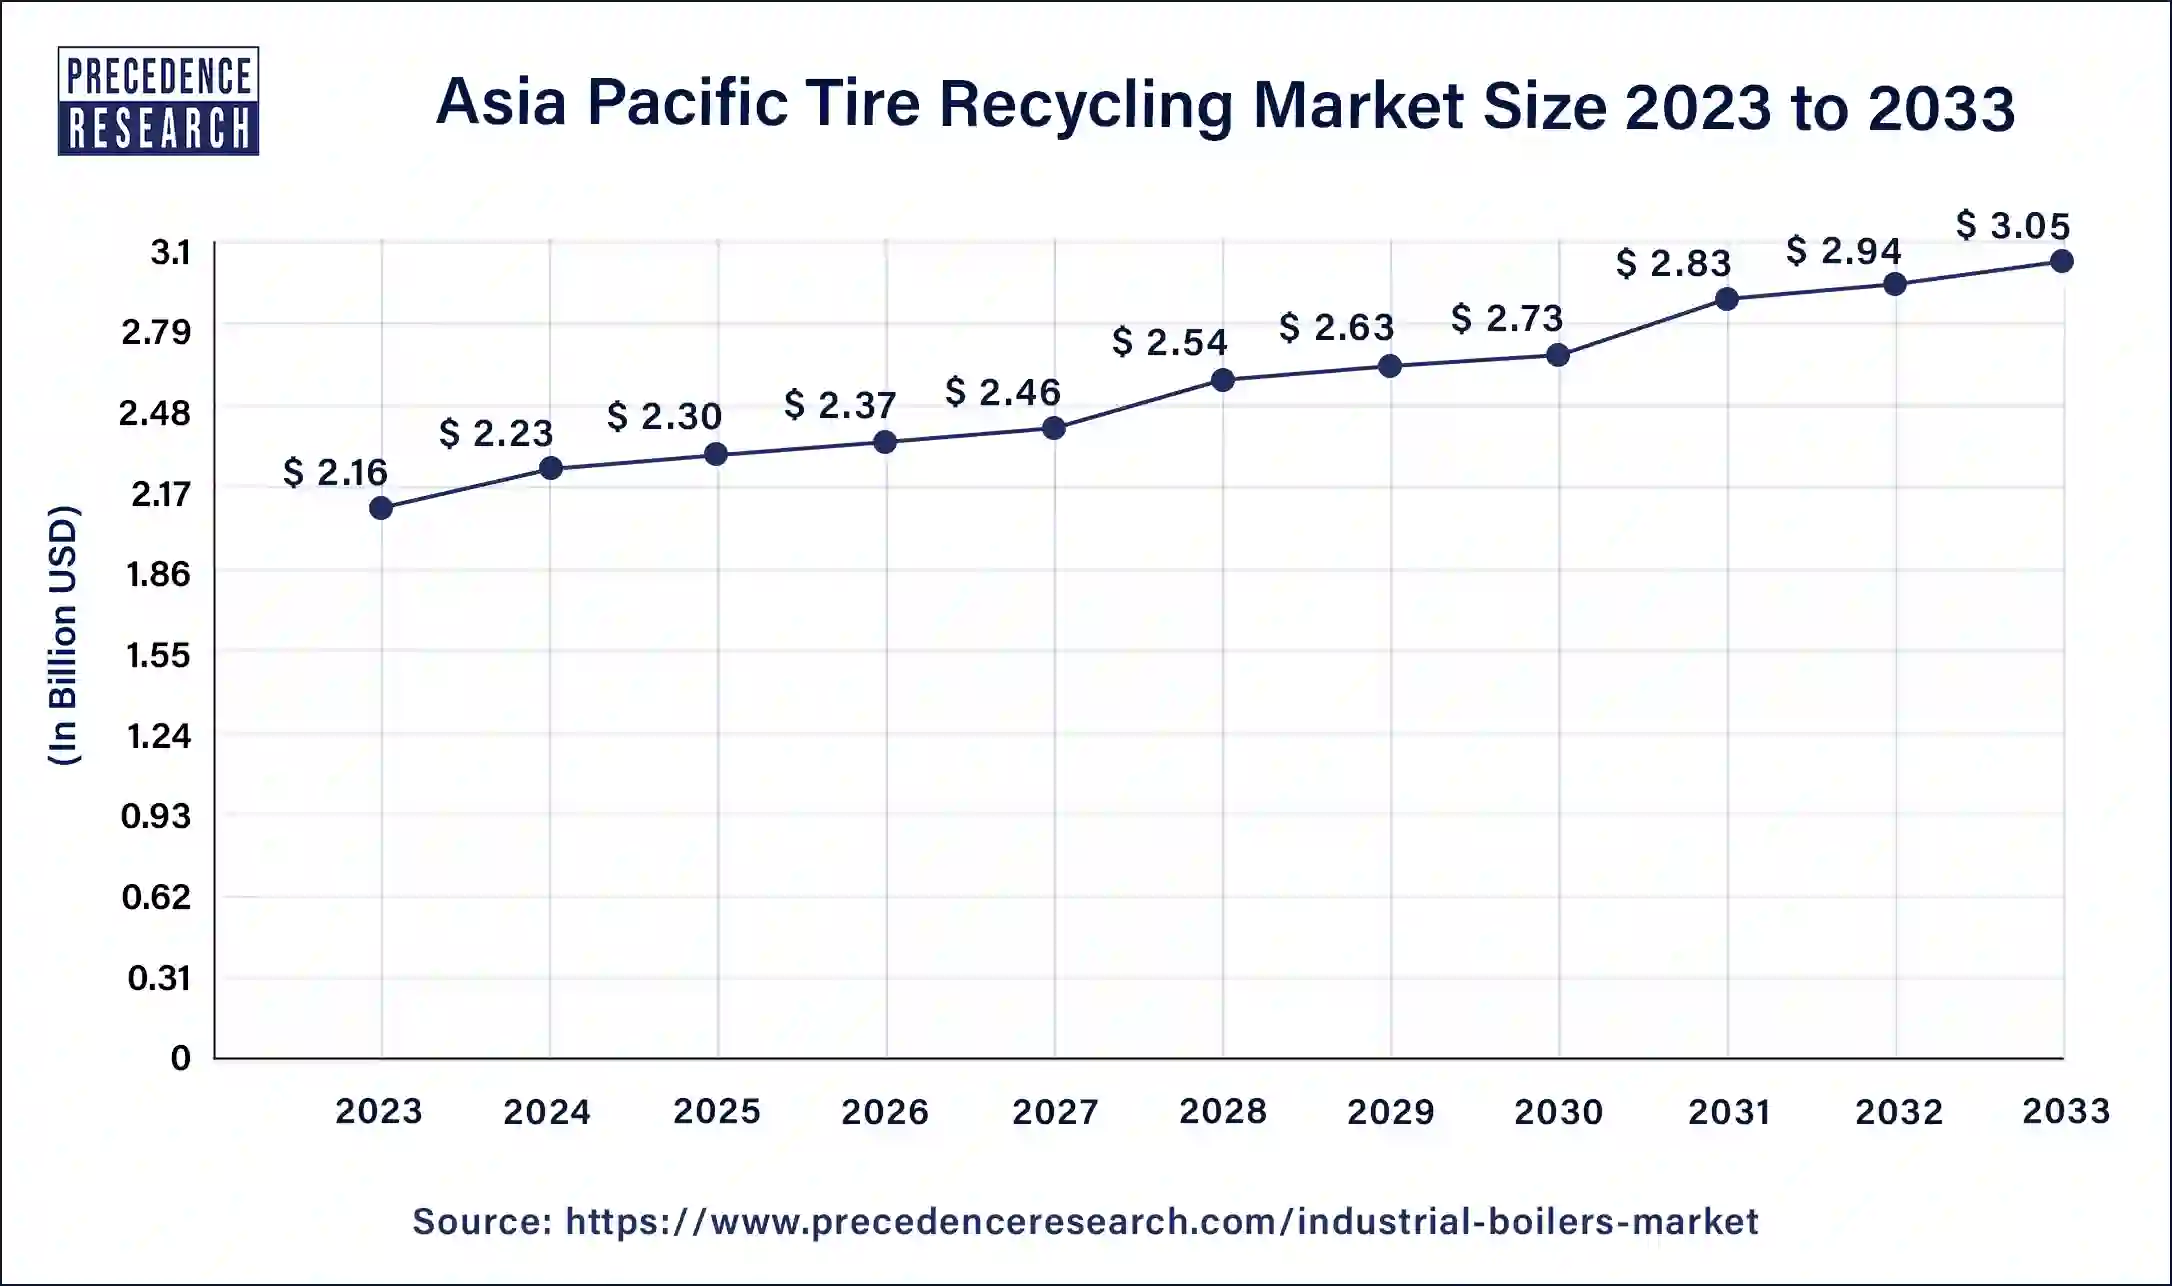 Asia Pacific Tire Recycling Market Size 2024 to 2033